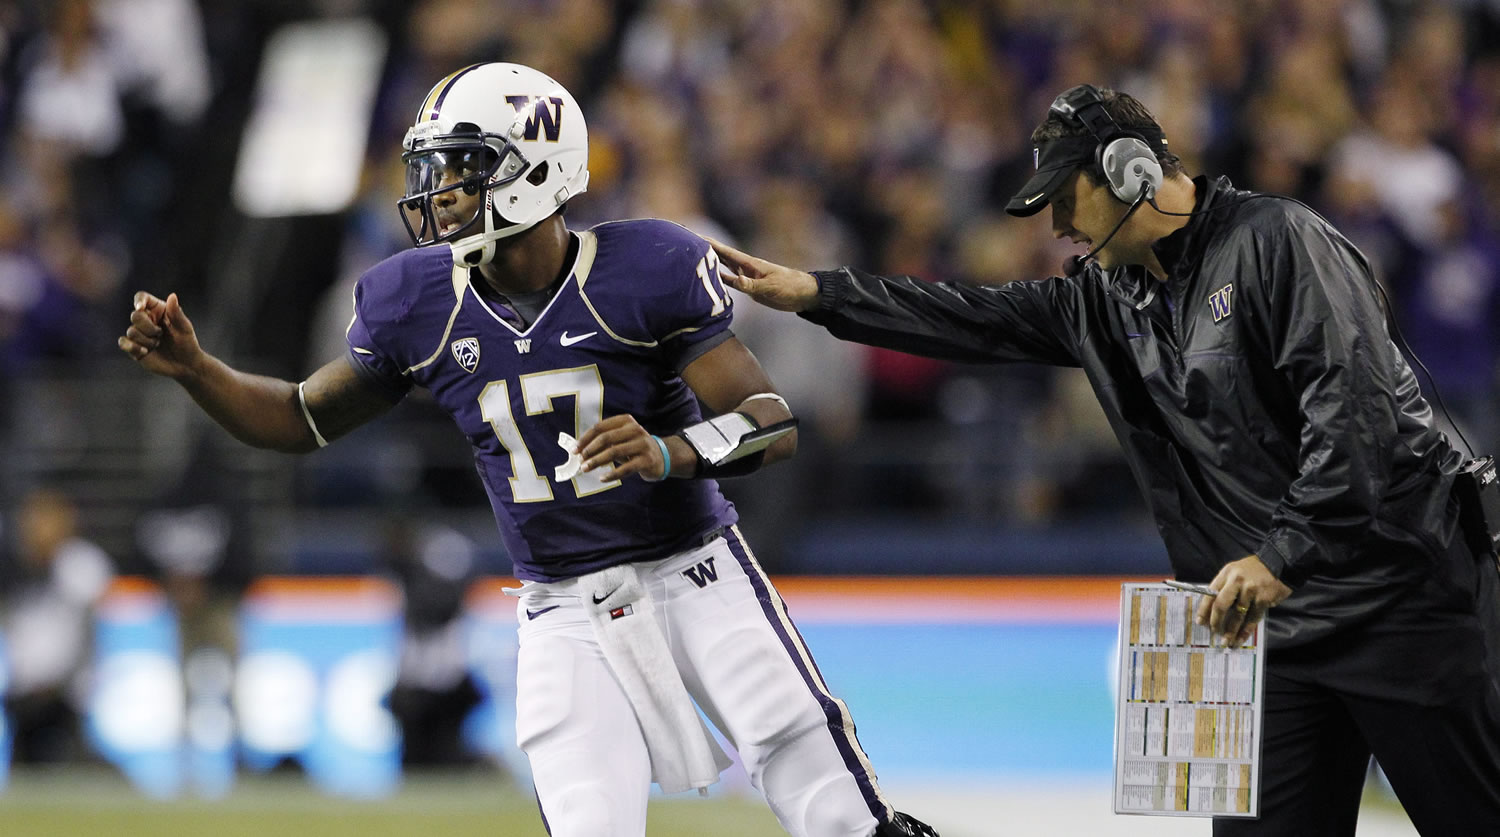 Washington coach Steve Sarkisian, right, gives quarterback Keith Price a pat as Price heads back into the game against Southern California after the two spoke during a break in the second half of an NCAA college football game  Oct.